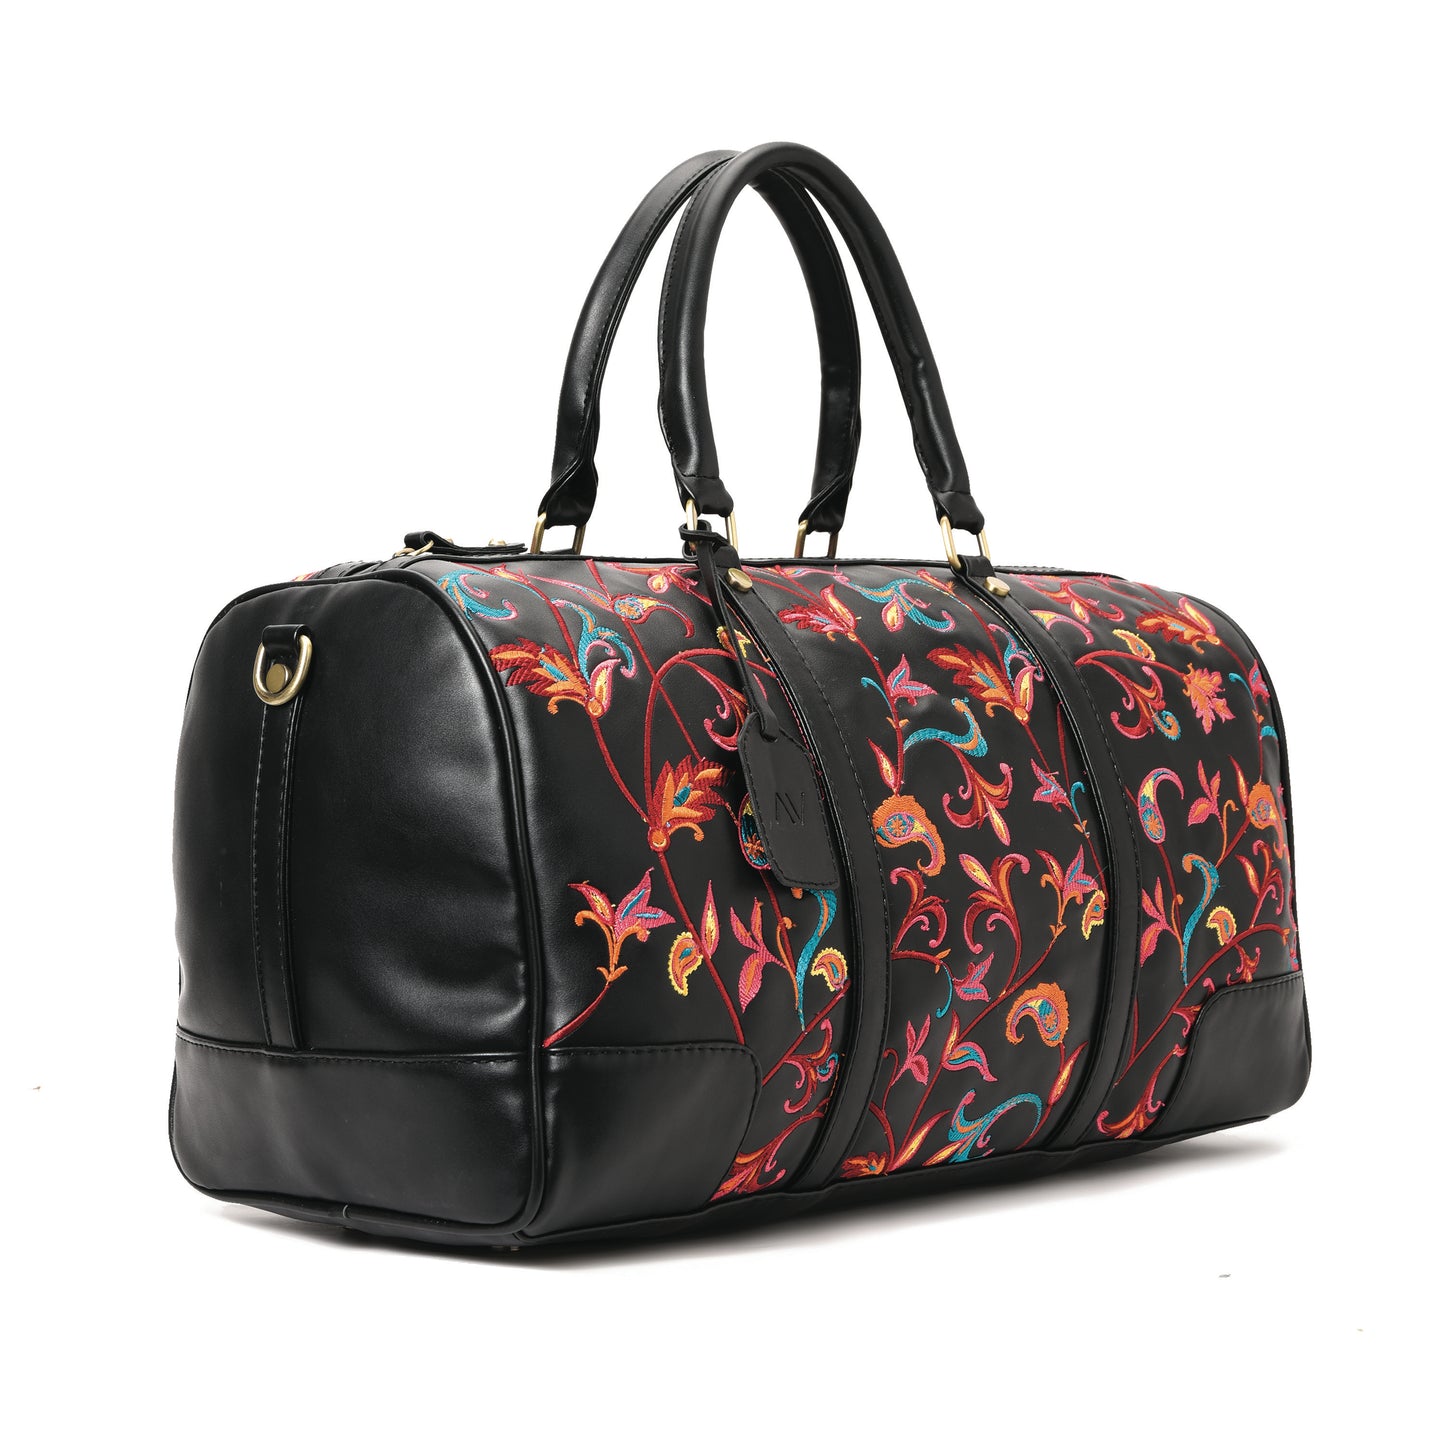 Duffle Bag Leather  Indian Black with multi colored